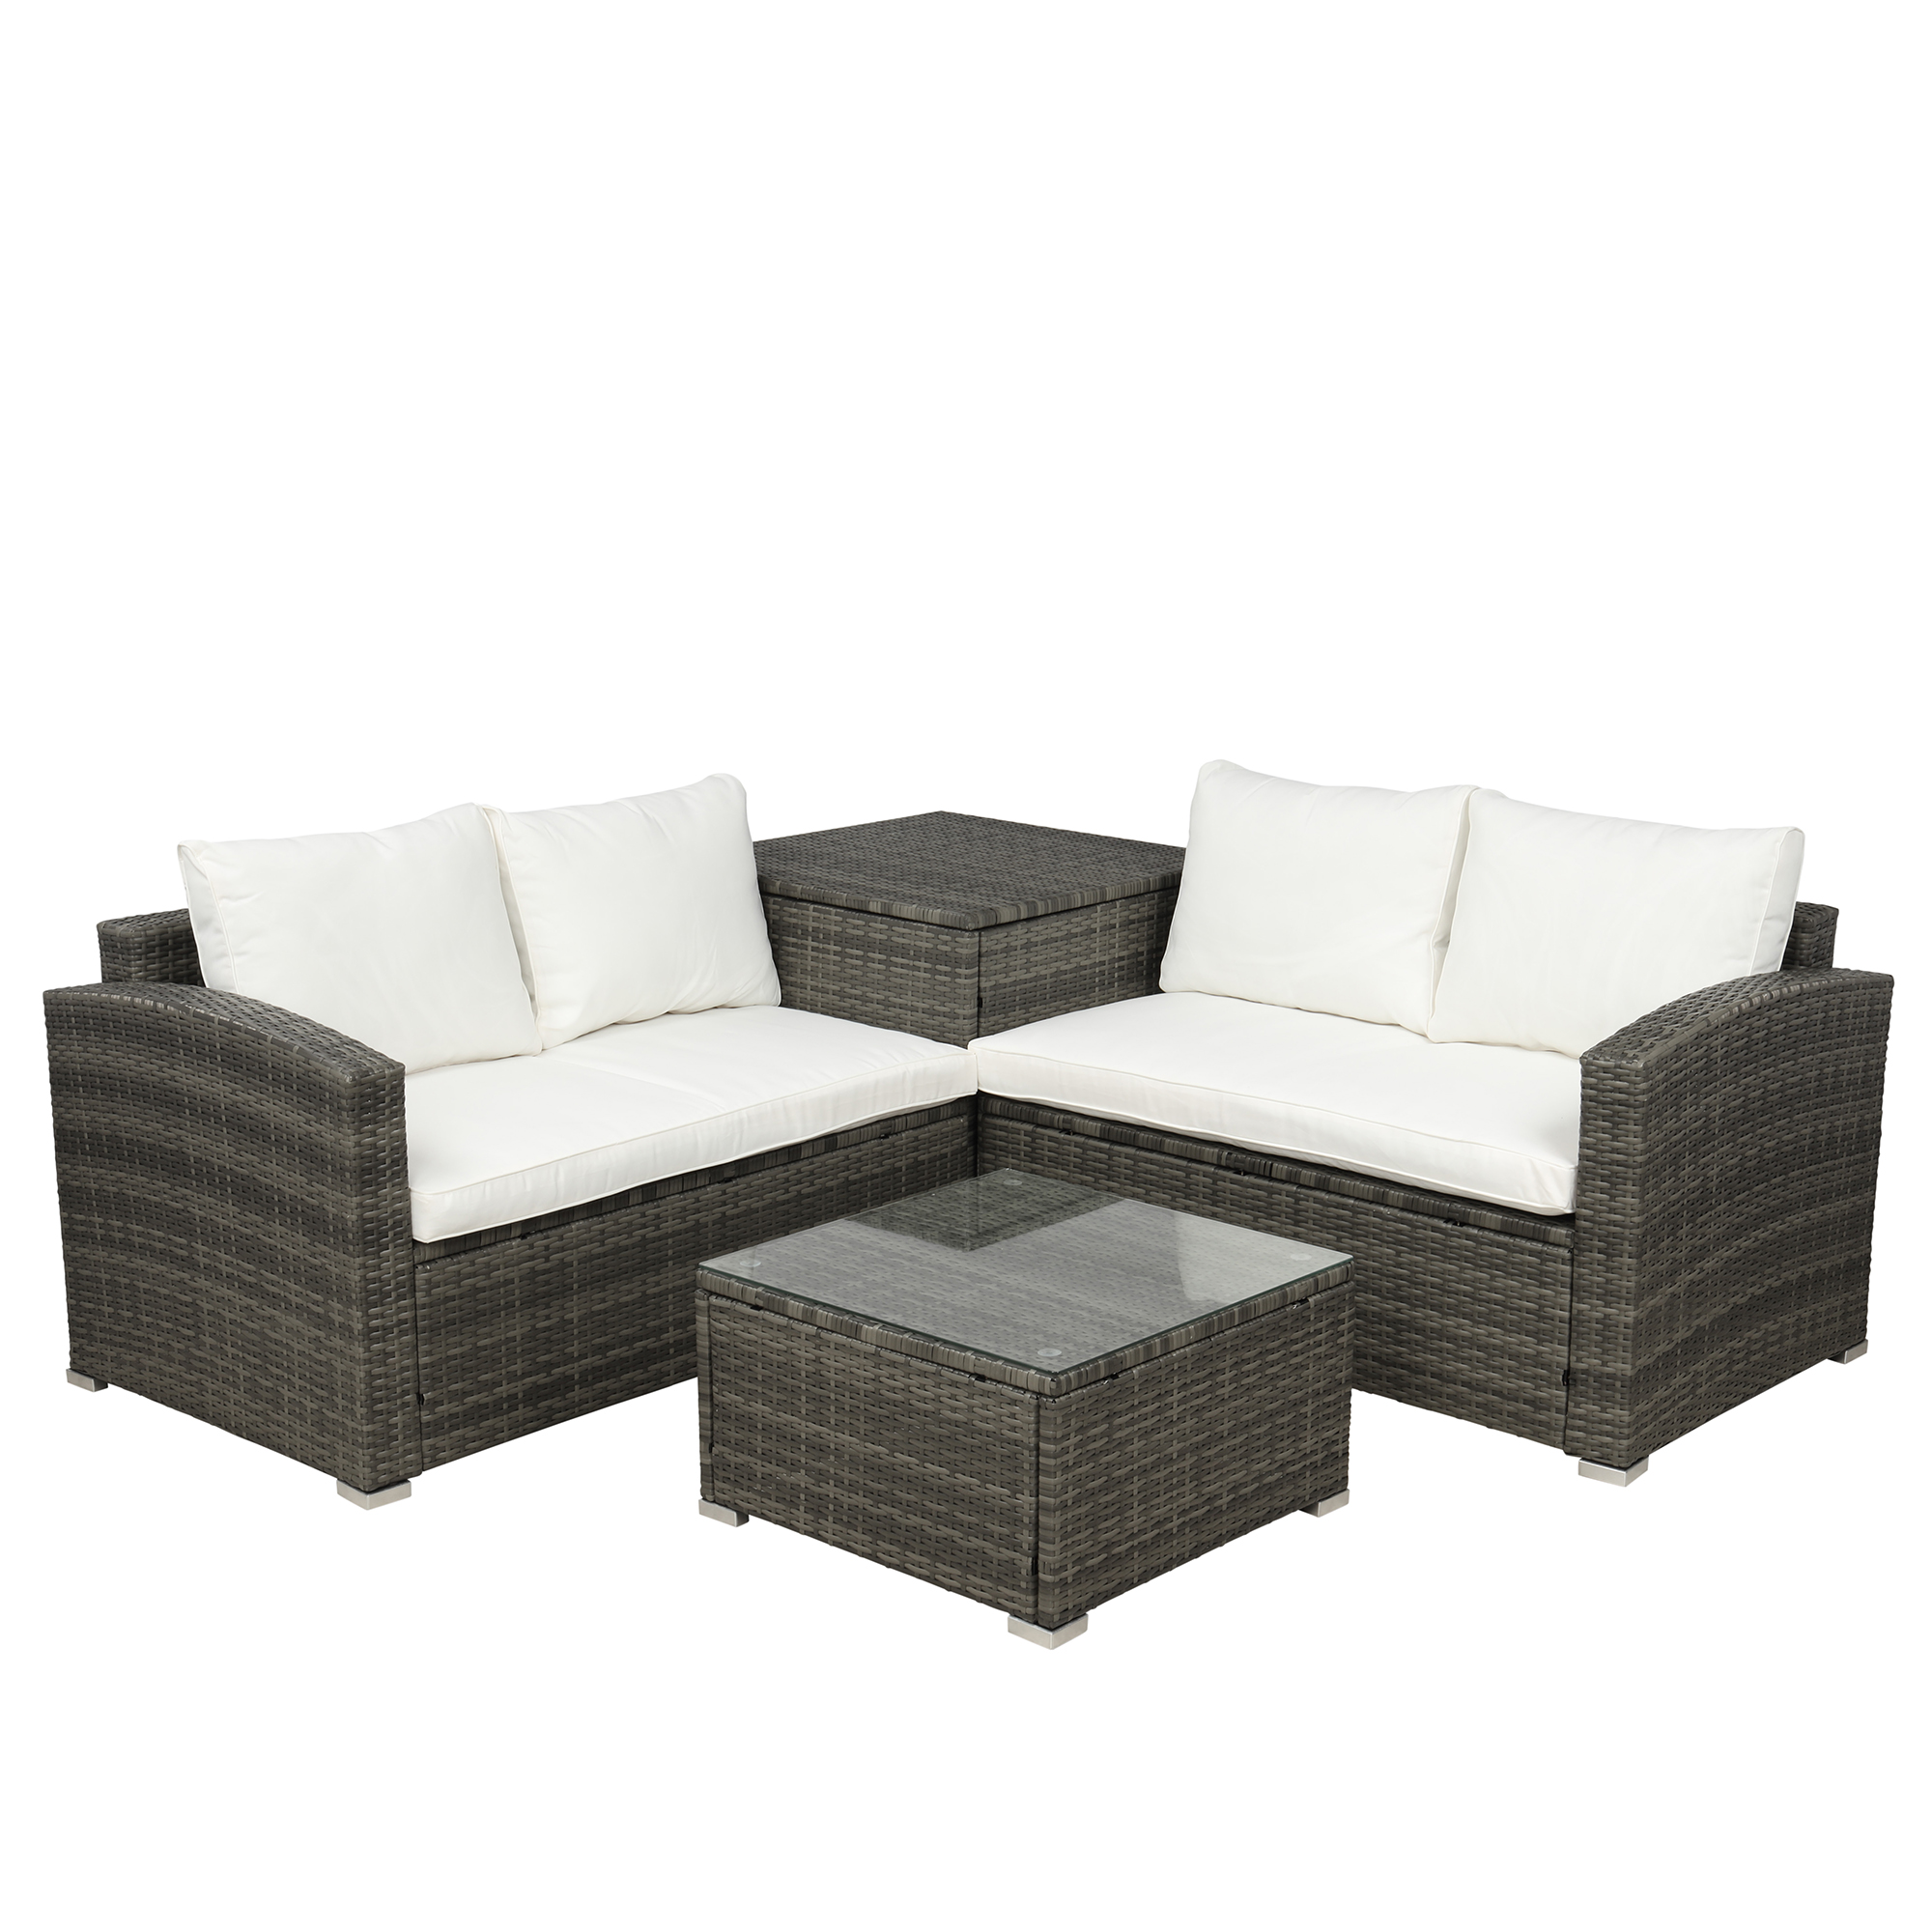 4 Pcs Patio Sectional Sofa Sets Outdoor Patio Furniture Sets Conversation Sets, Wicker Rattan Sectional Couch Sofa Set with Cushions, Pillows and Coffee Table - image 3 of 8